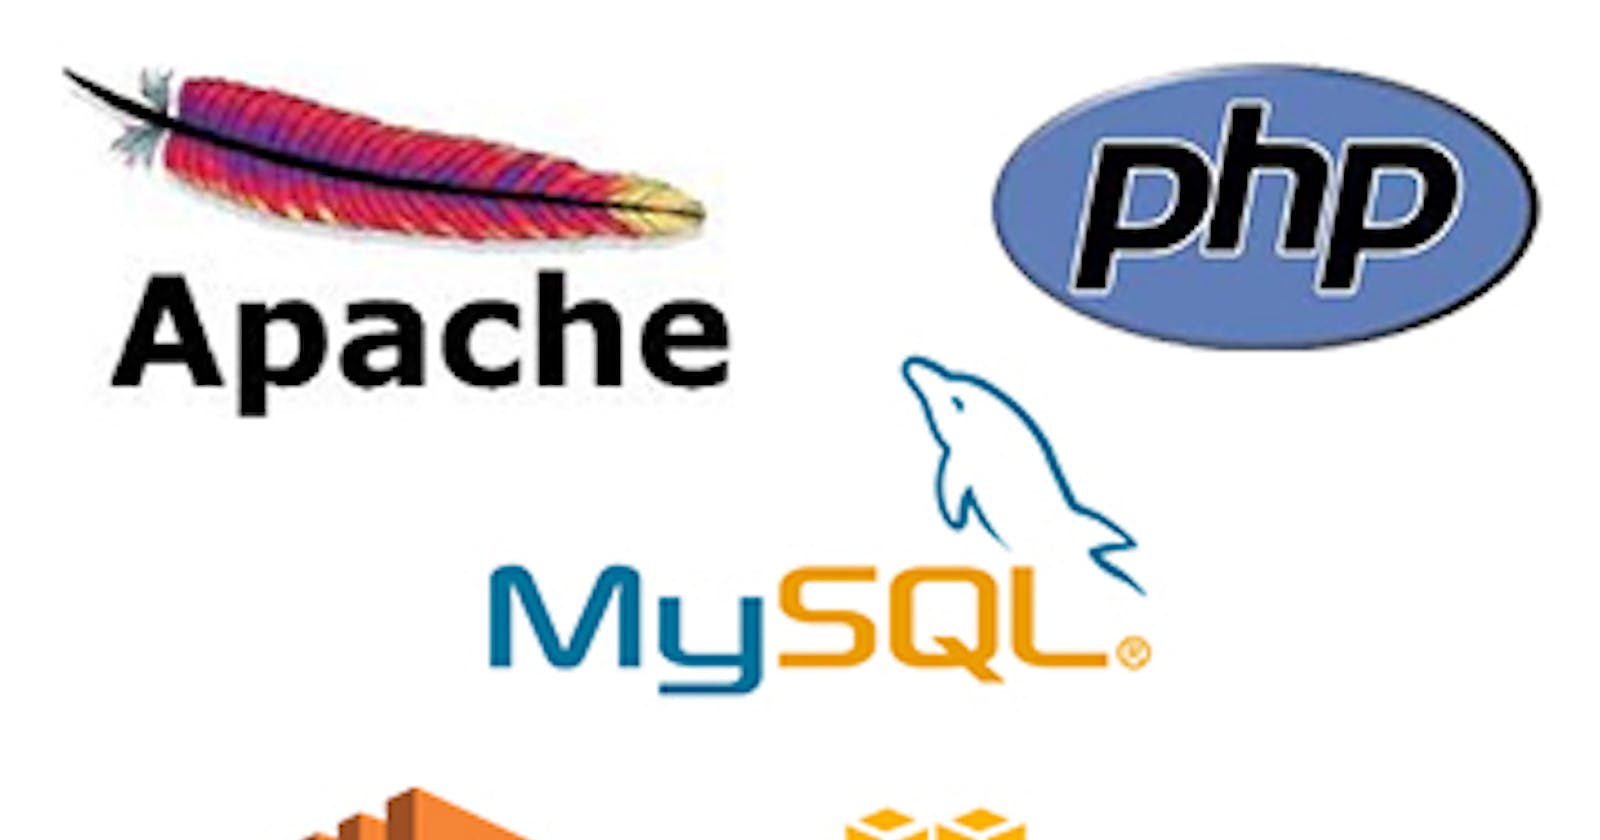 How to Install Laravel 10.10 with php 8.1 ,Apache2 and Conneted to MySQL on AWS Ubuntu 22.04 LTS